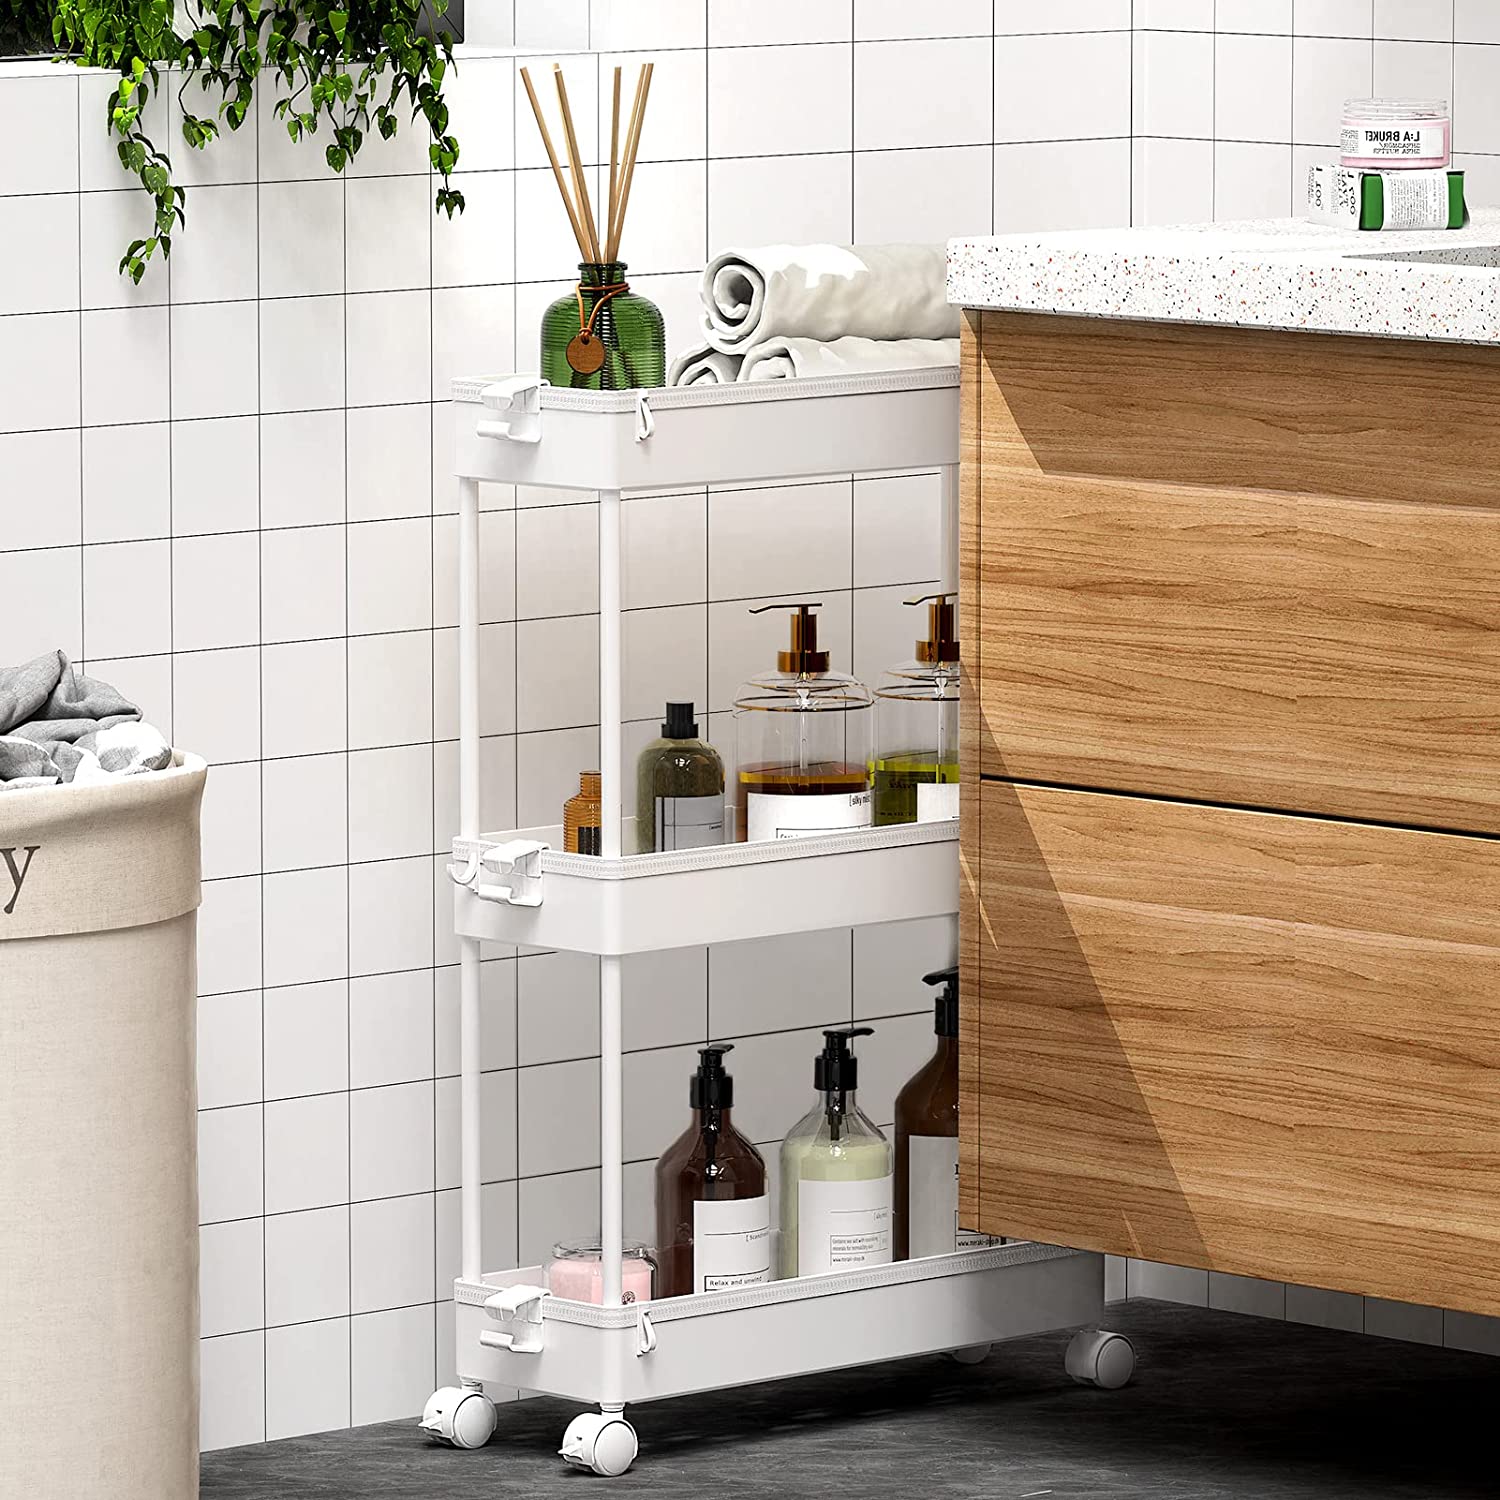 a rolling cart is a great way to provide storage solution to a small bathroom and also a very practical idea to move things around easily